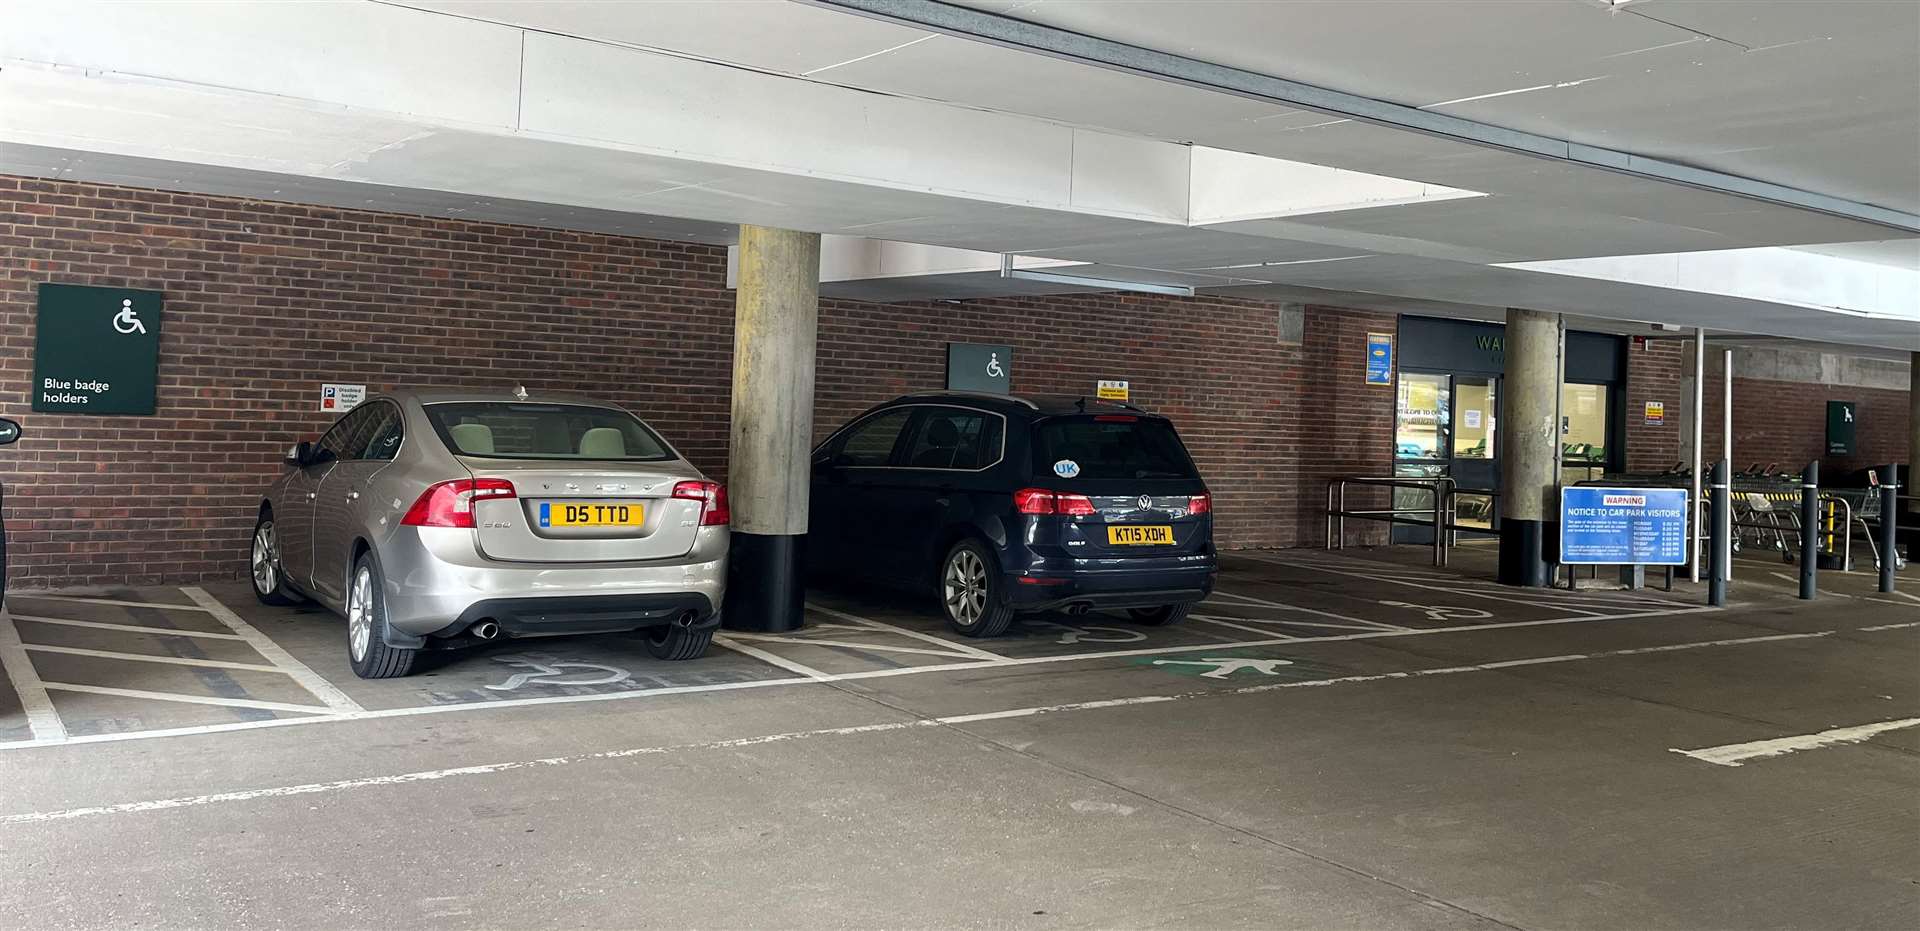 On the lower level of the car park, disabled bays can be accessed, right by the entrance to the lifts that go straight into the store